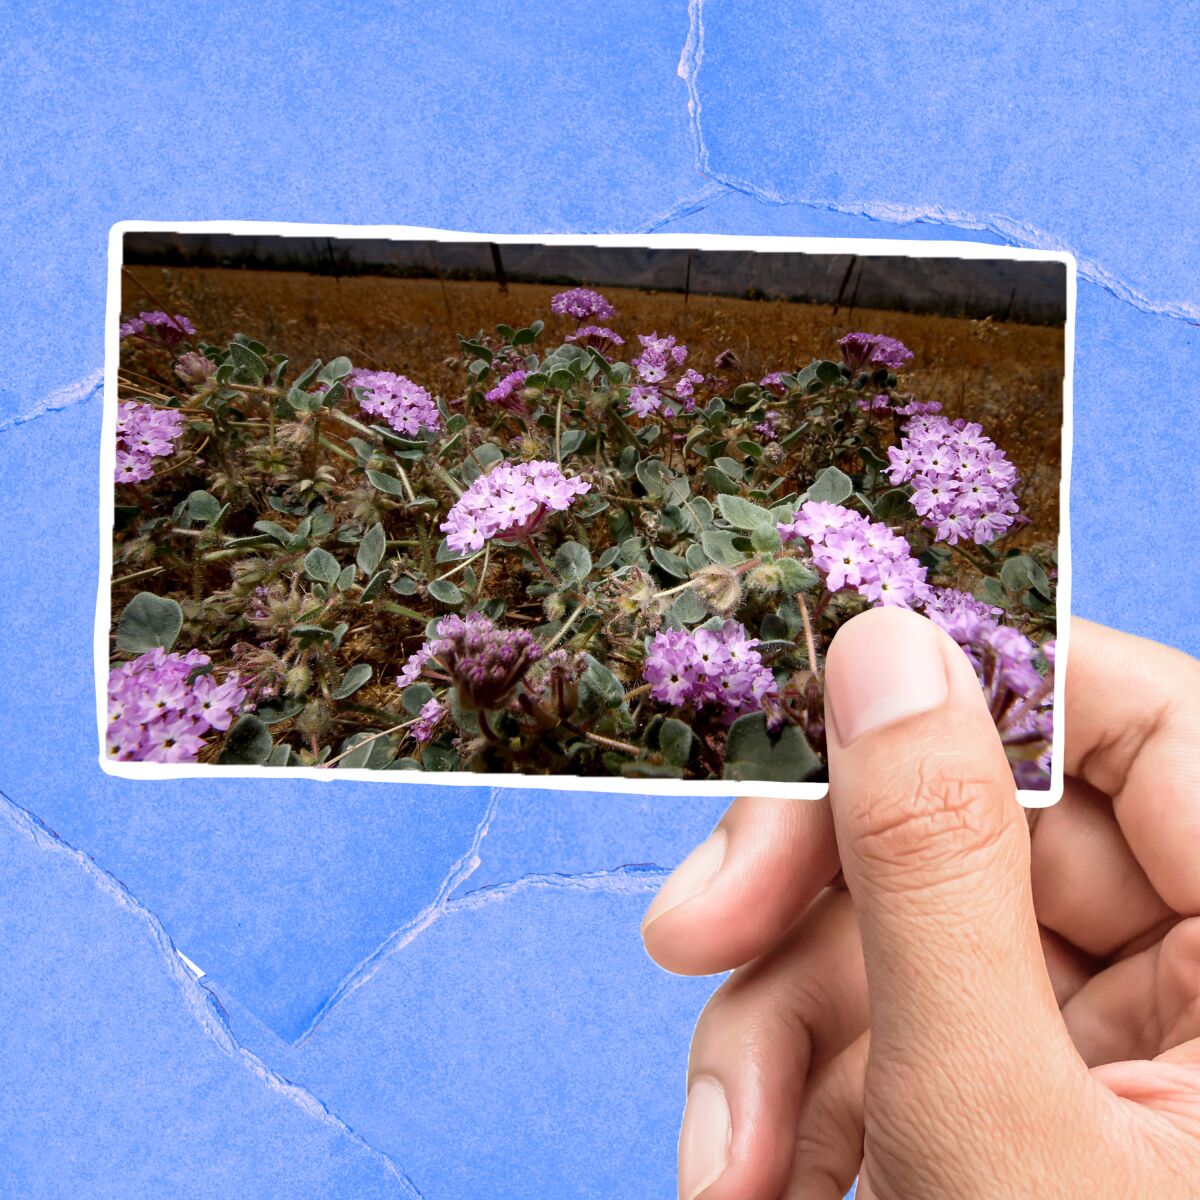 Closeup of a hand holding a library card with a closeup image of small purple flowers on it.